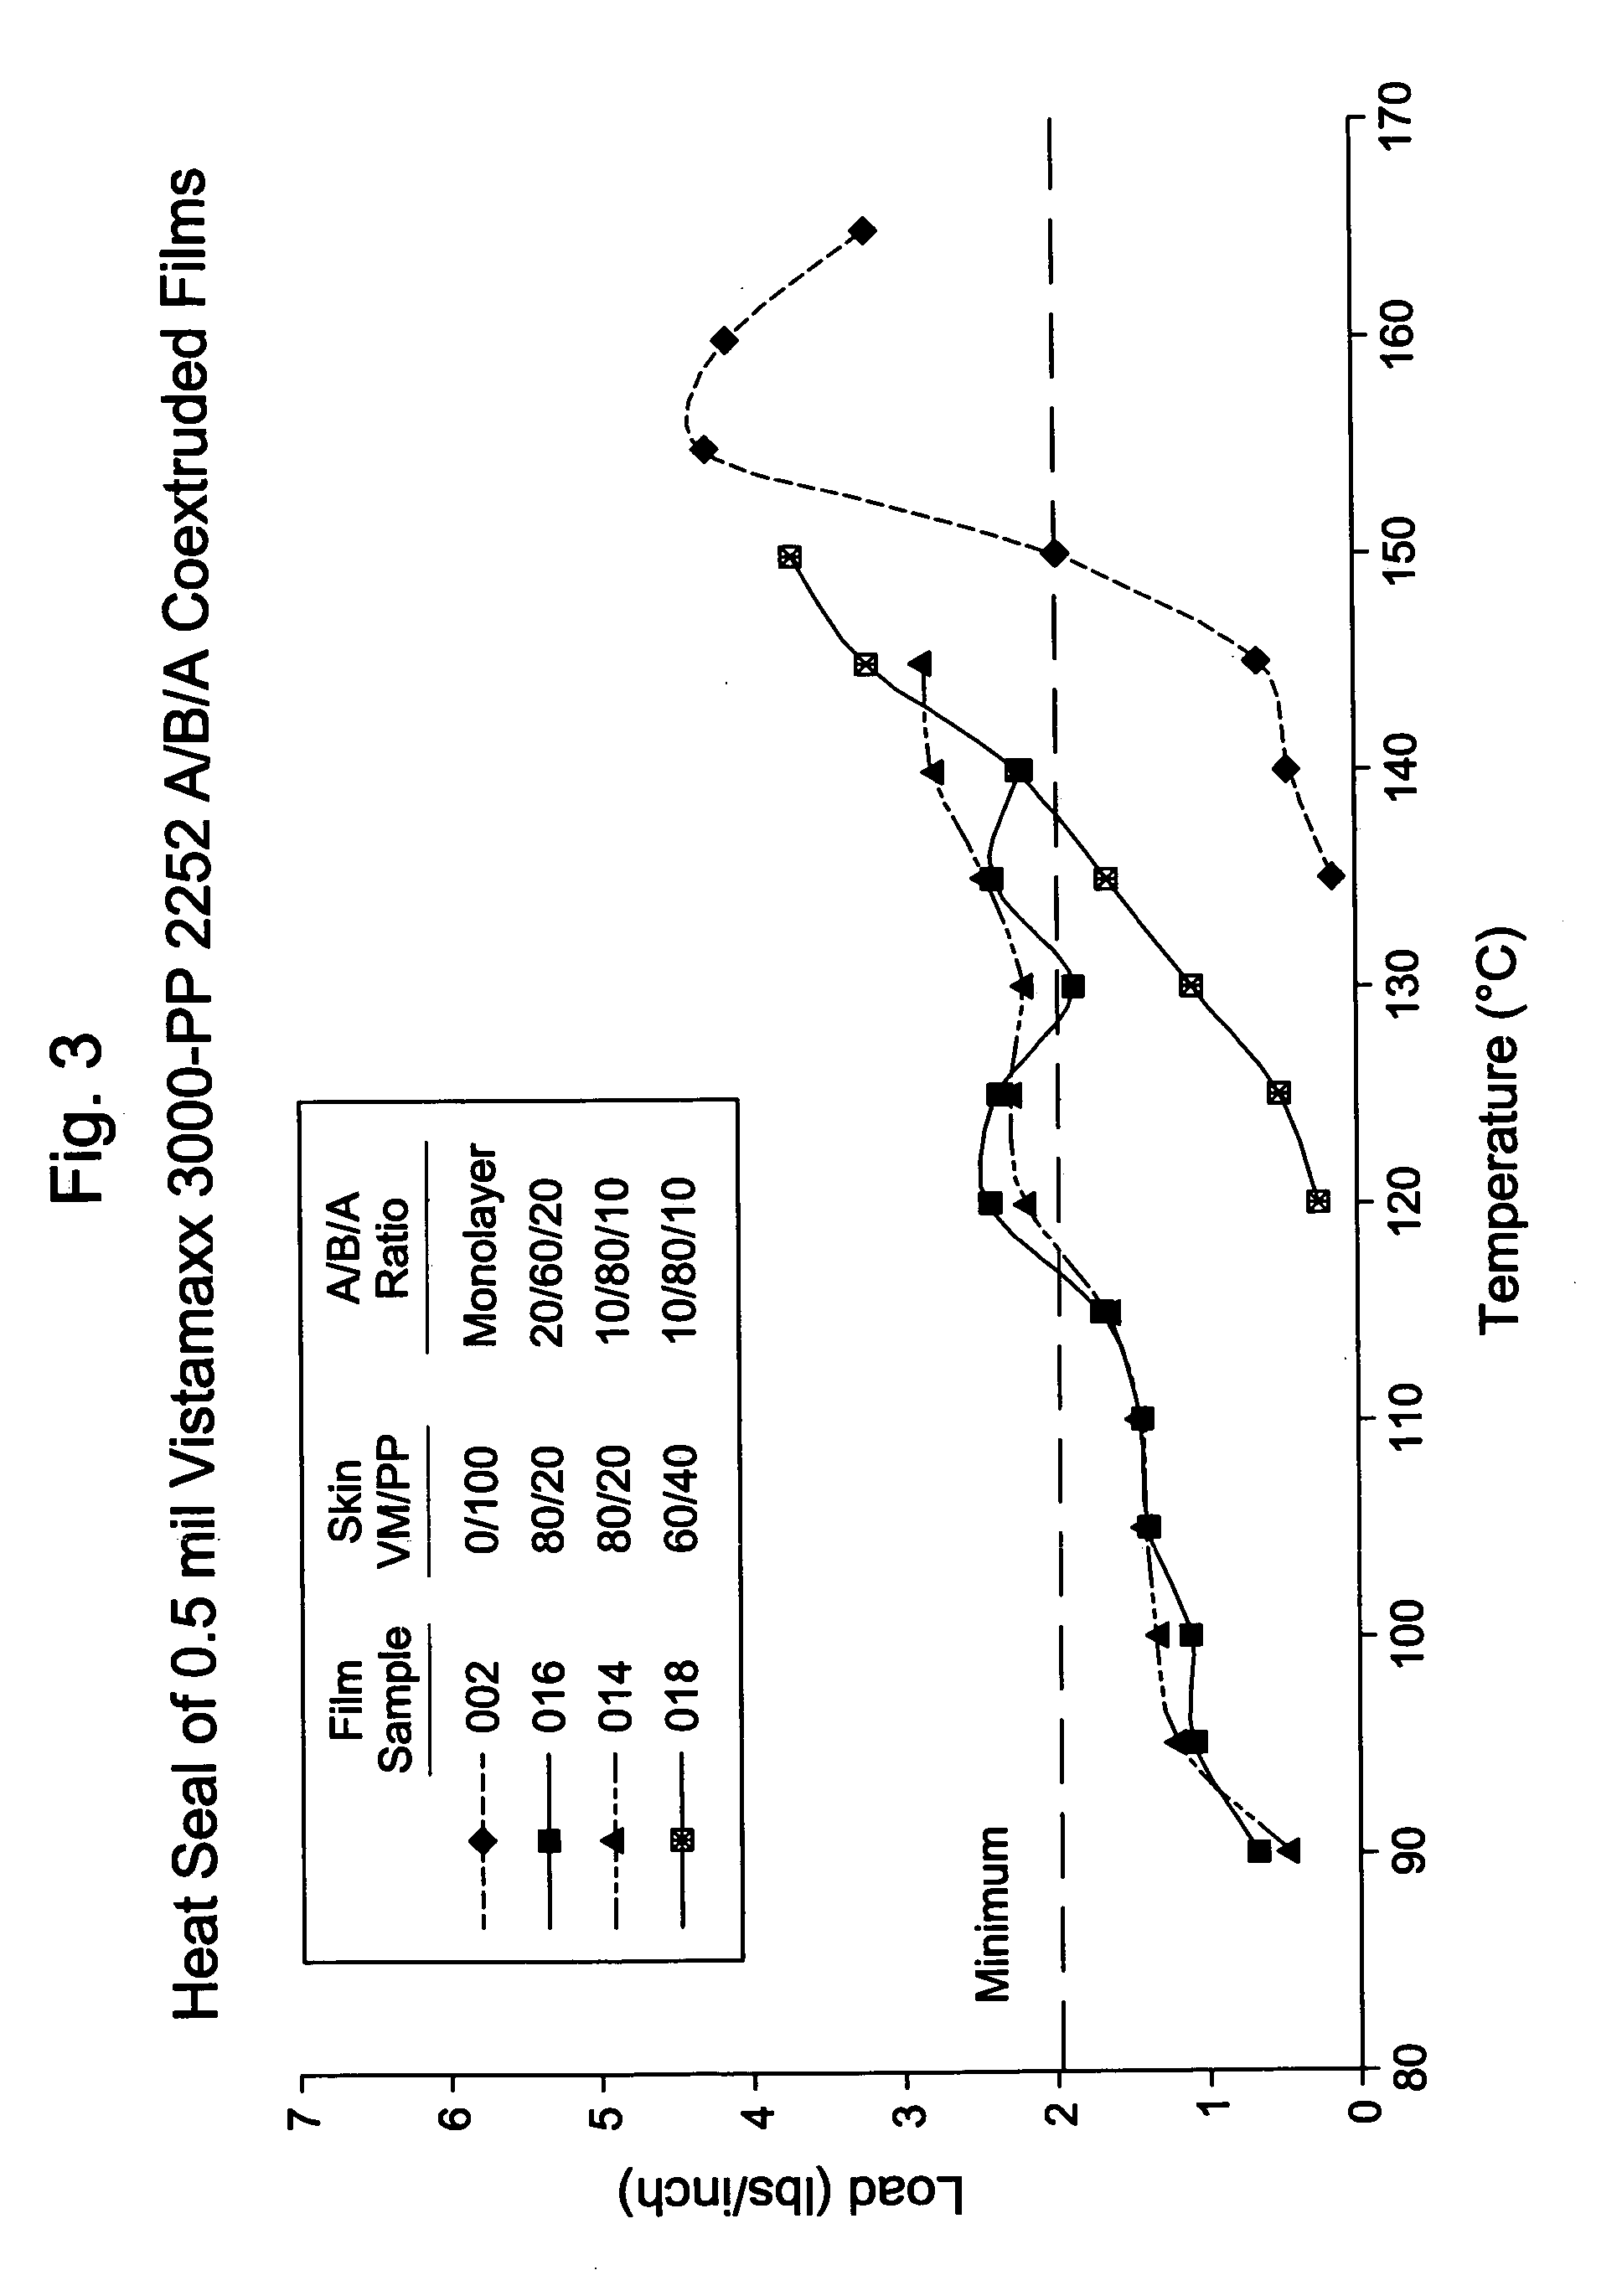 Films incorporating polymeric material combinations, articles made therefrom, and methods of making such films and articles